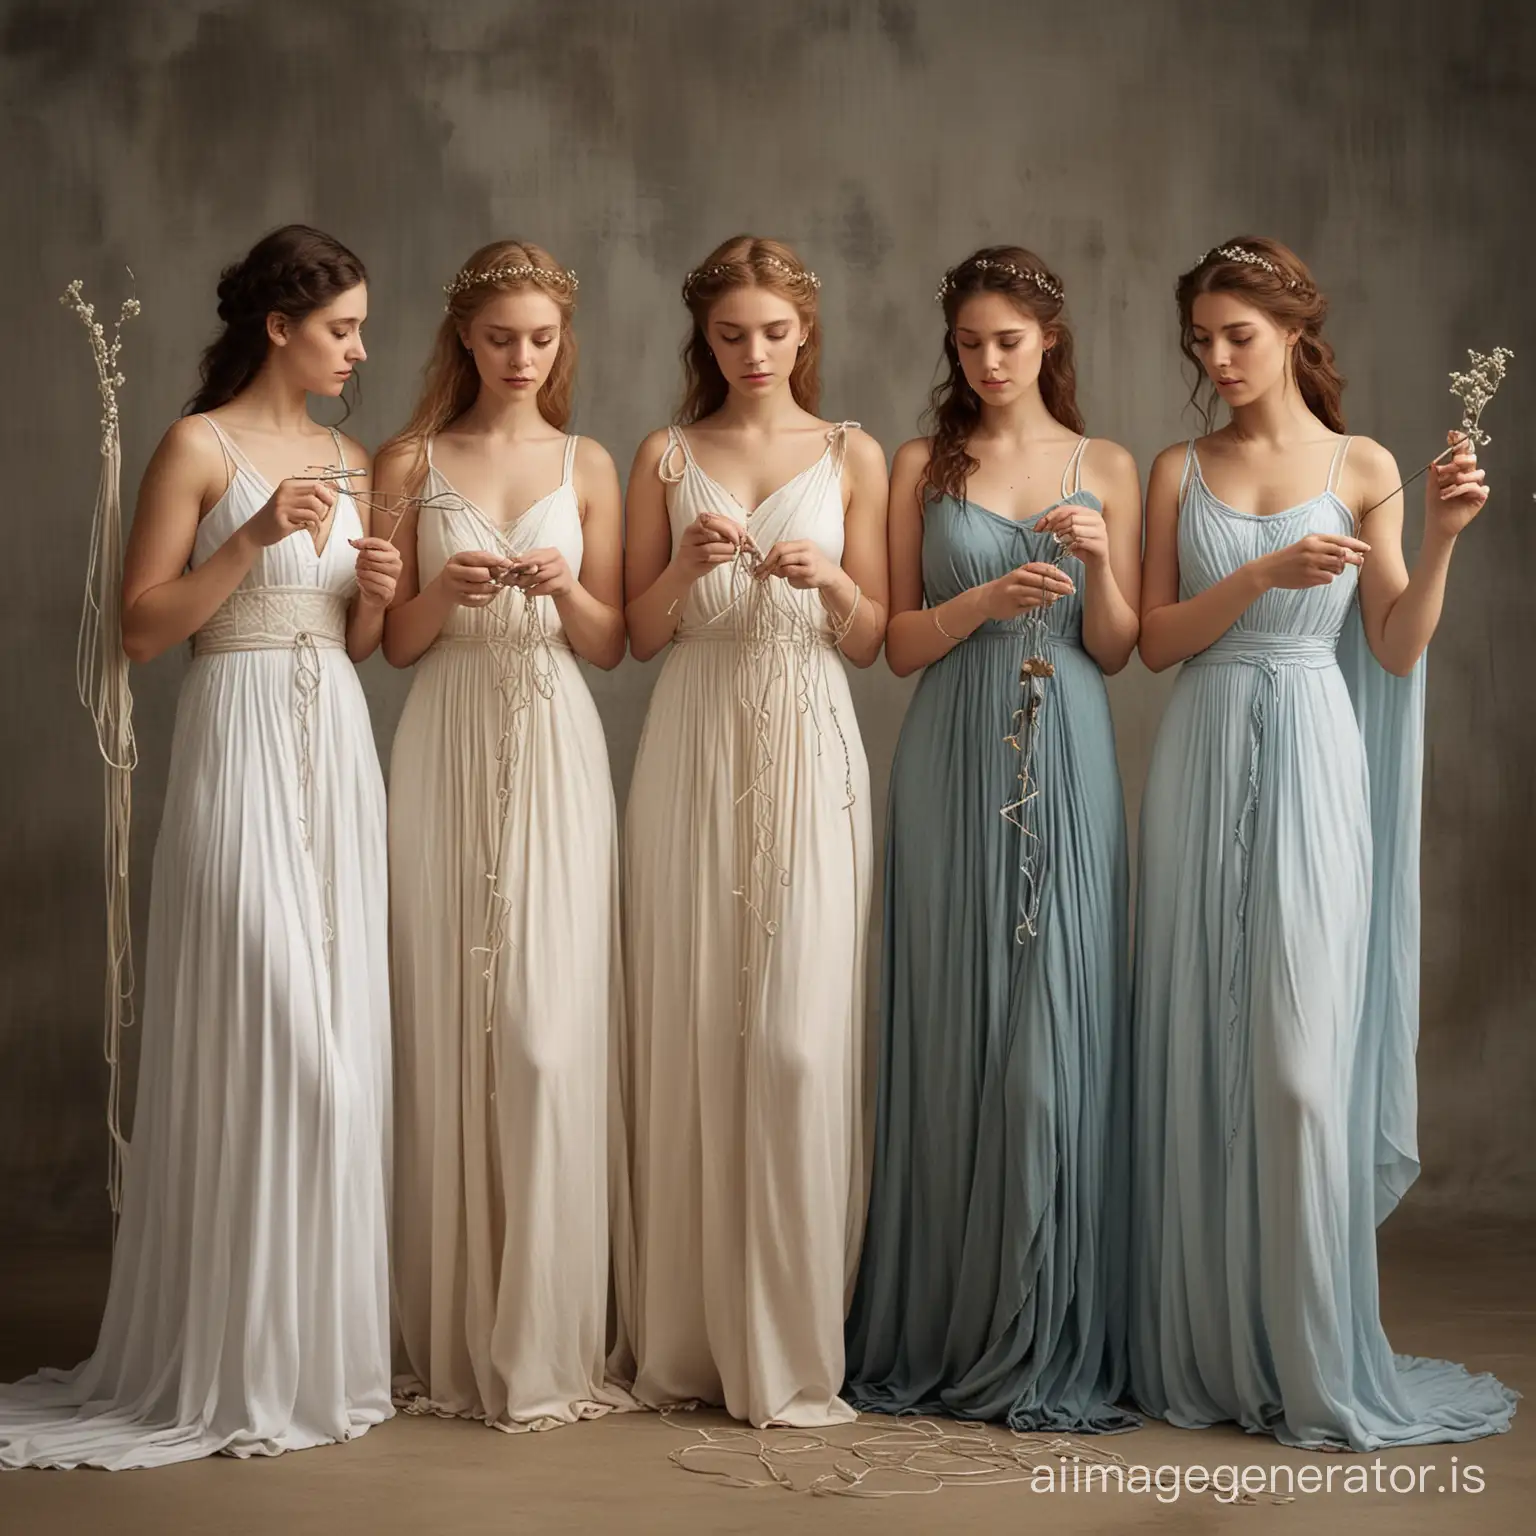 Greek mythology Fates 3 beautiful women standing up wearing dresses holding thread of life together
Woman left weave the thread
Woman right twist thread
woman above cuts thread scissors